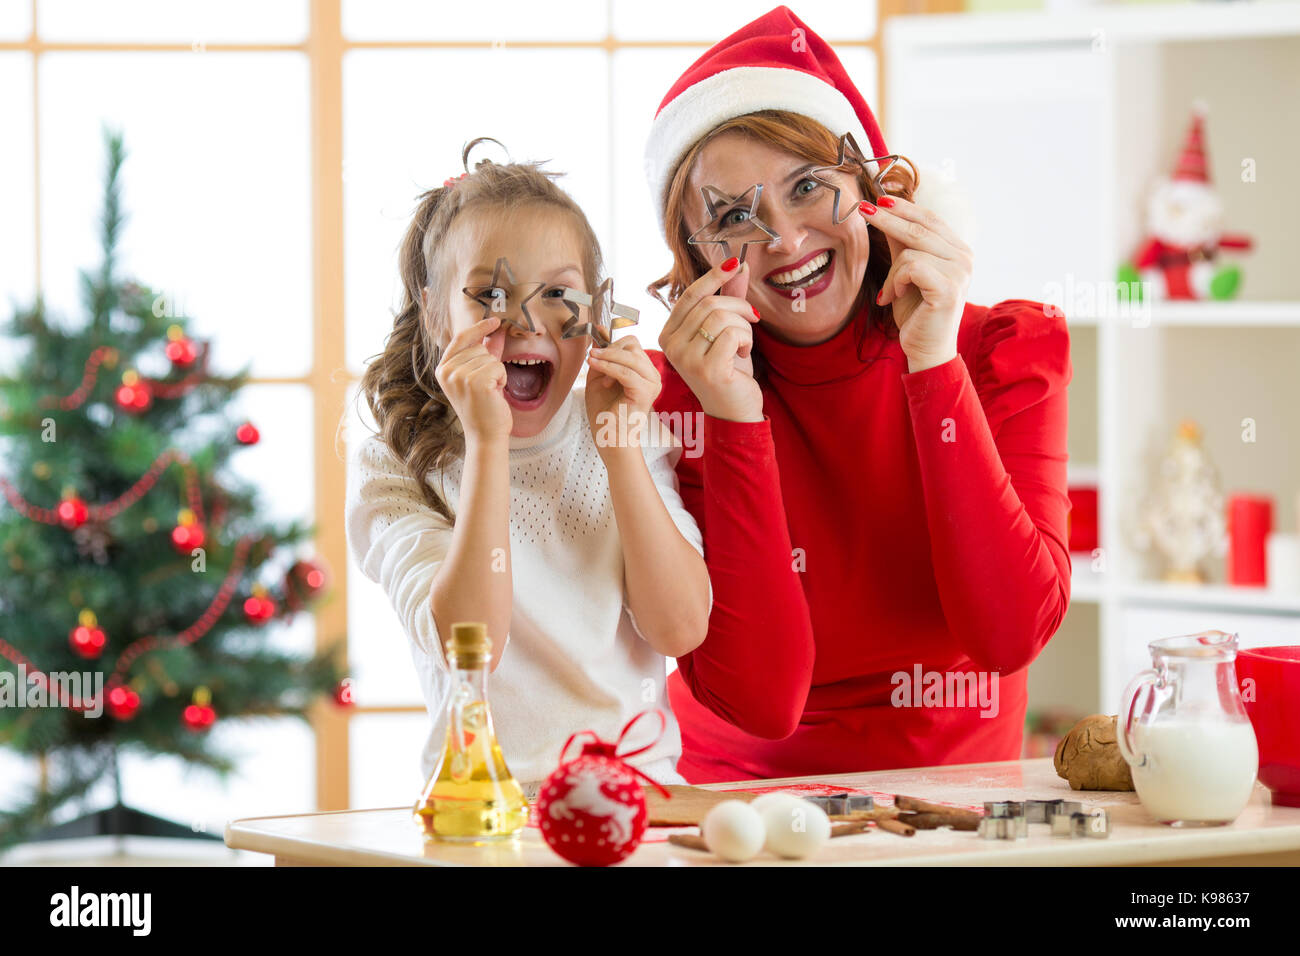 happy family mother and child have a fun preparing the dough. Woman and daughter bake christmas cookies in festival decorated room Stock Photo